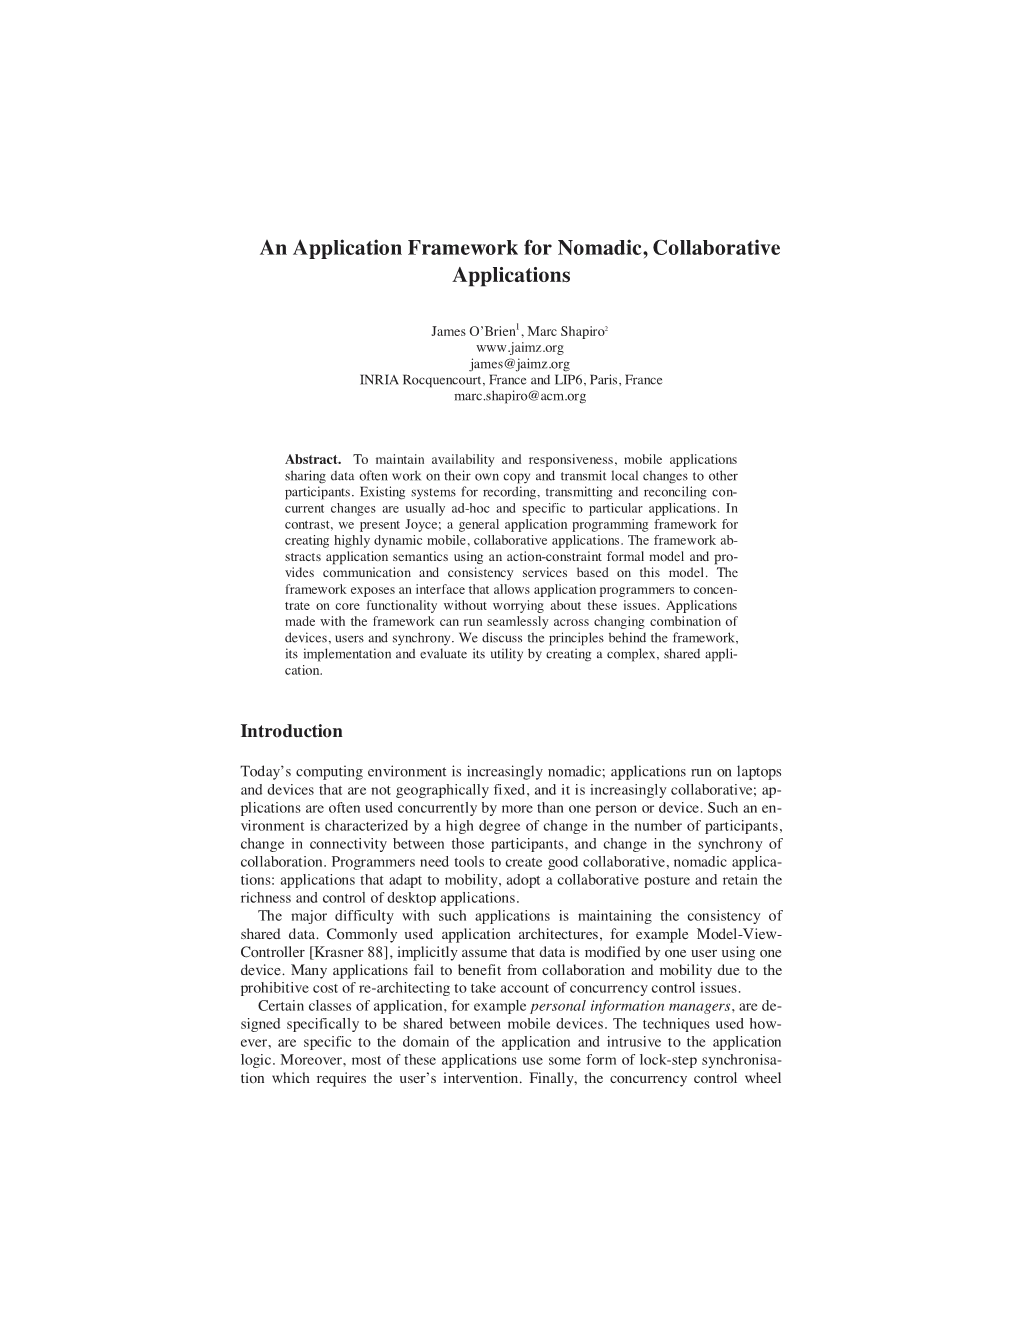 An Application Framework for Nomadic, Collaborative Applications